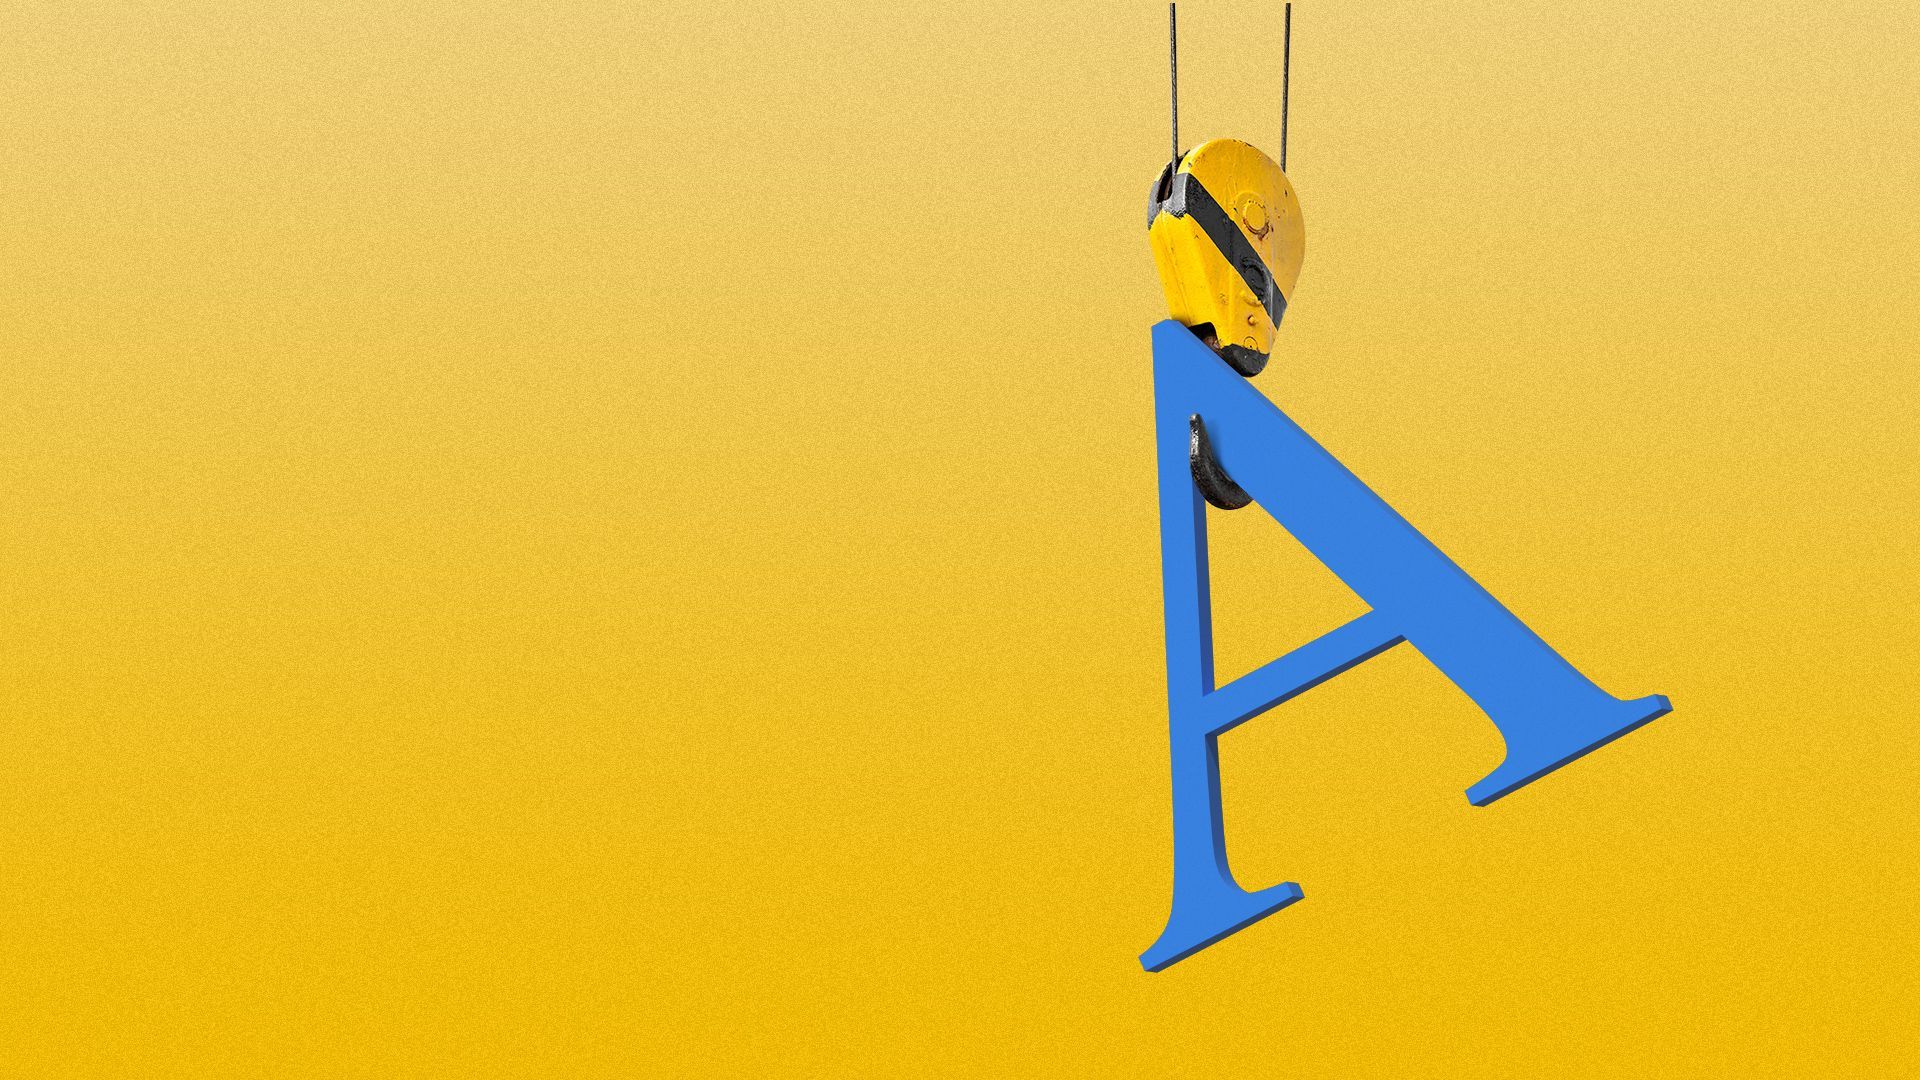 Illustration of a letter "A" being lifted up by a construction crane hook. 